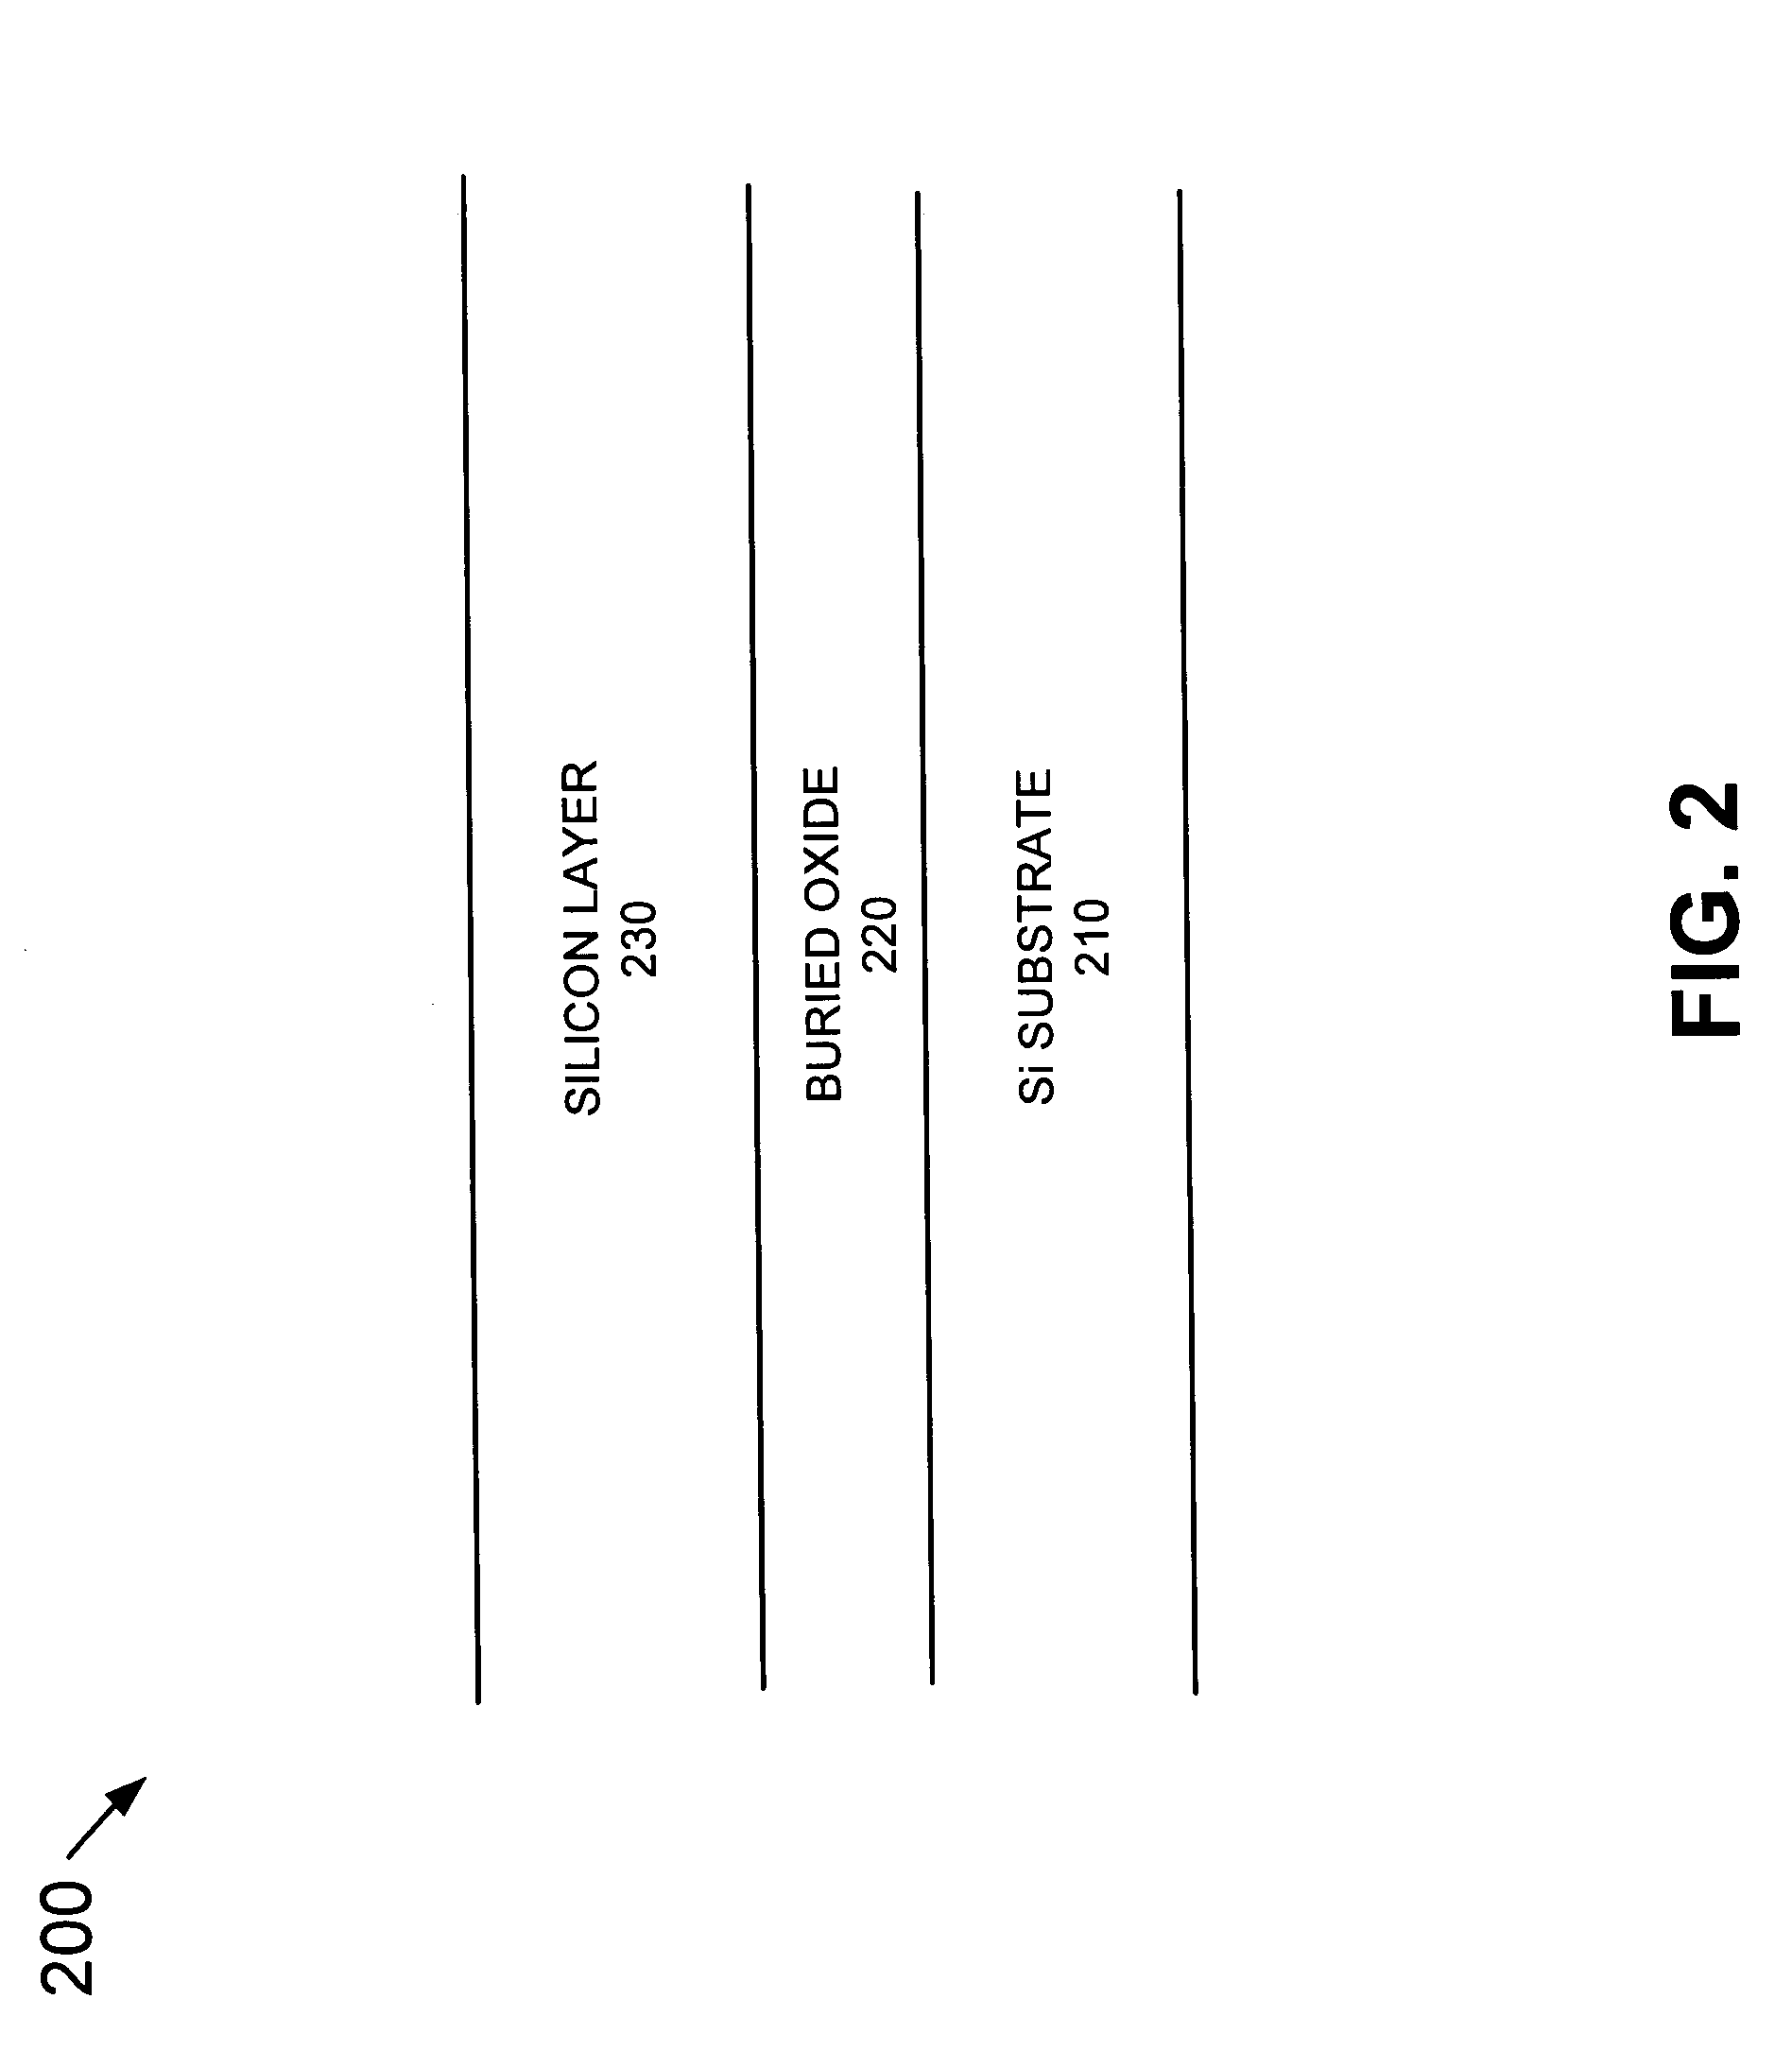 Method for doping structures in FinFET devices